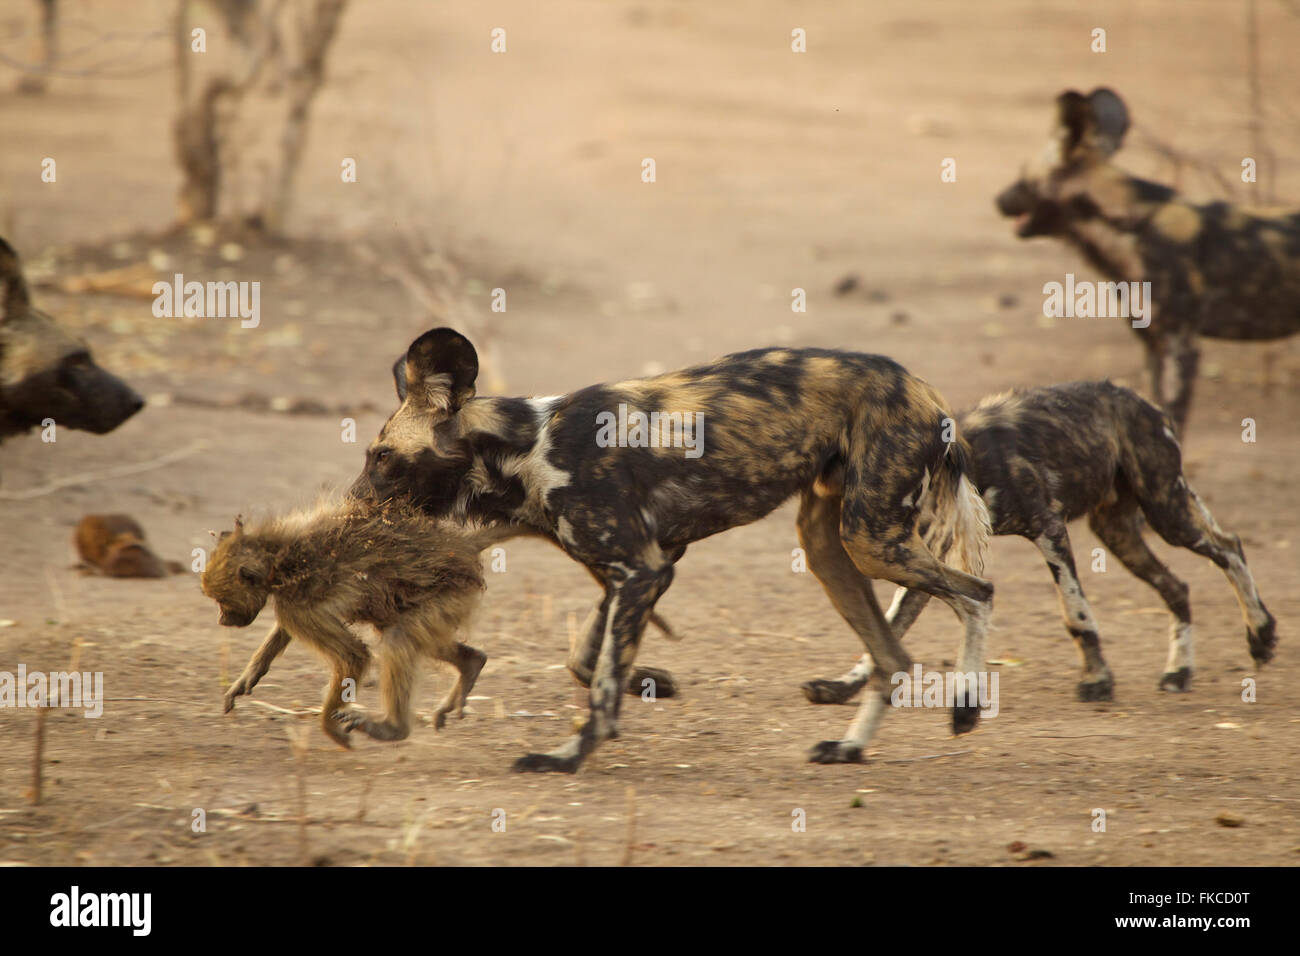 African wild dog carrying a baboon in its mouth, Mana Pools, Zimbabwe Stock Photo